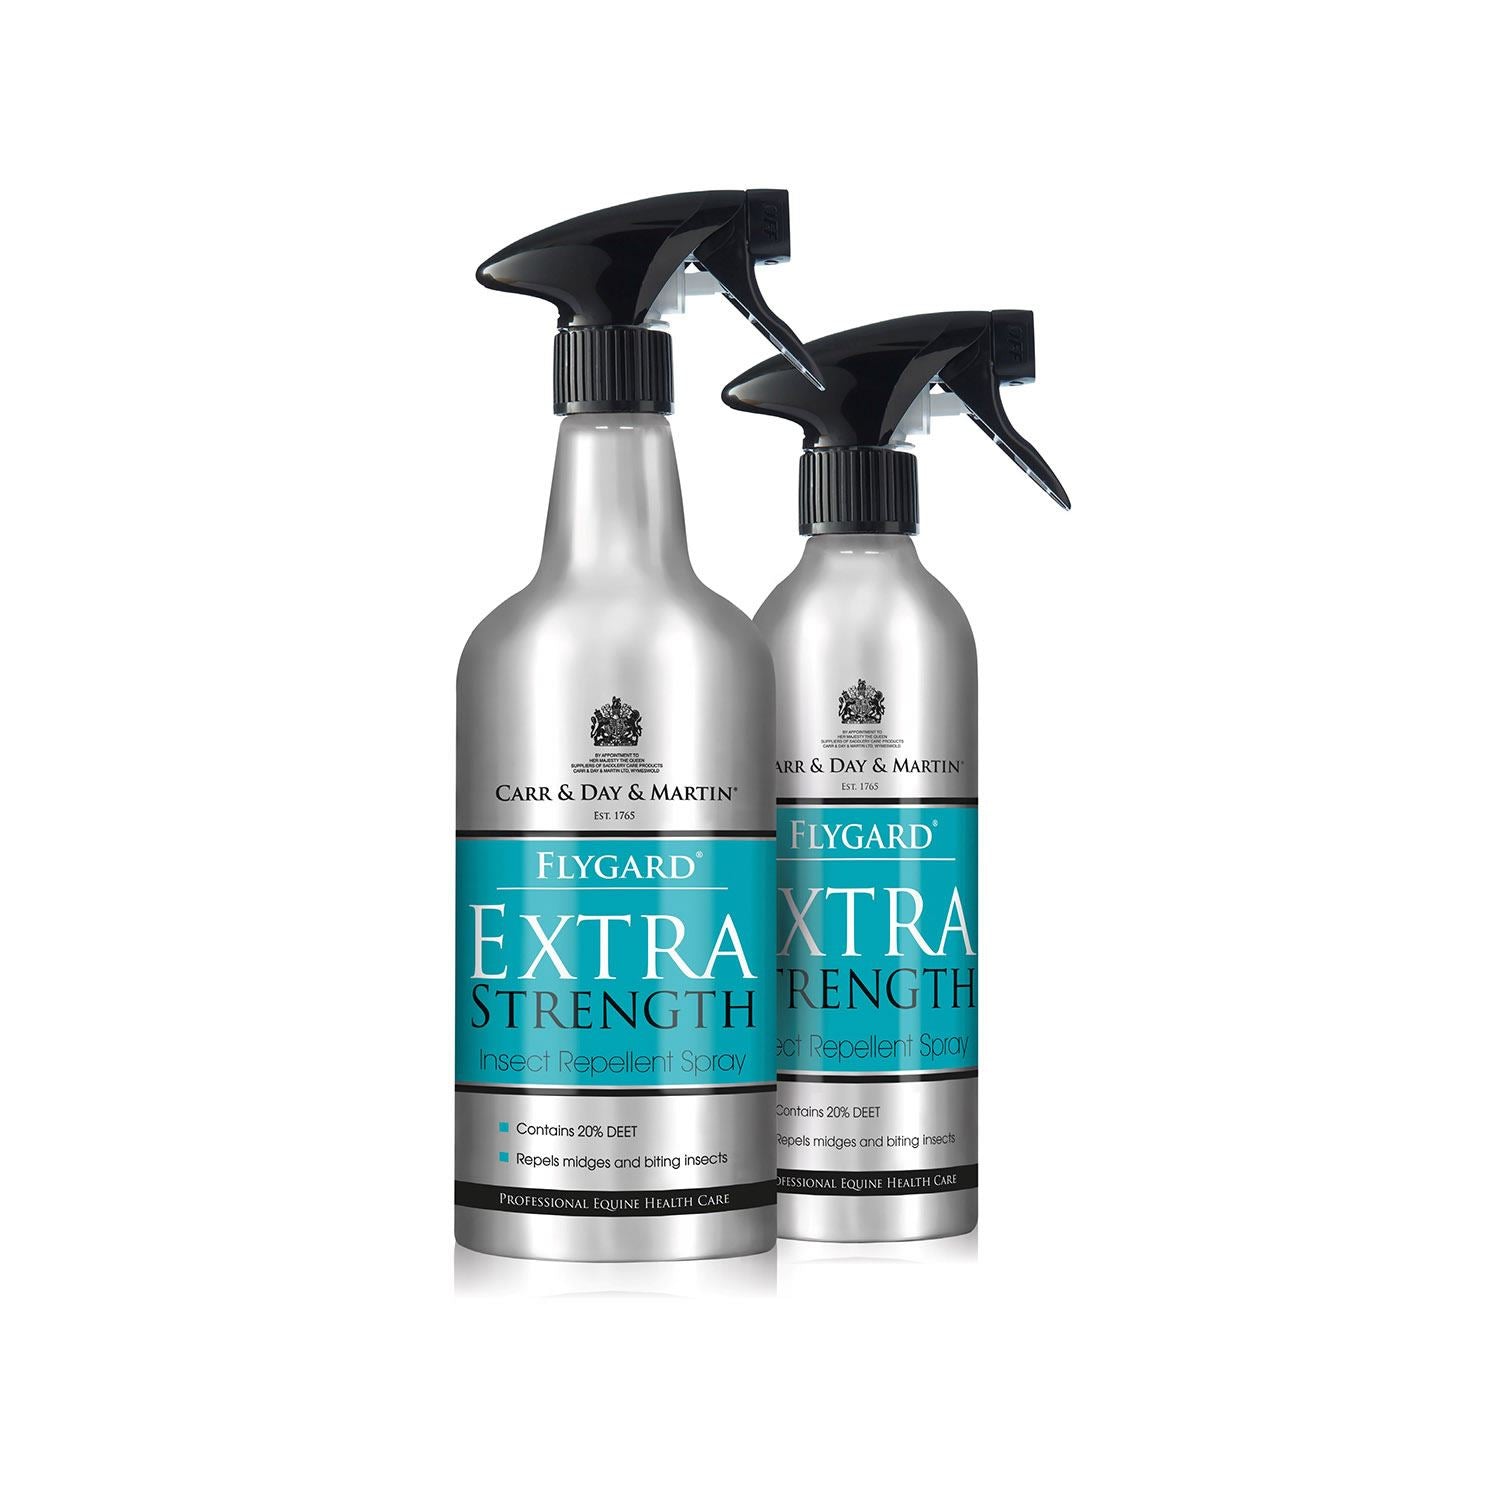 Carr & Day & Martin Flygard Extra Strength Insect Repellent - Just Horse Riders